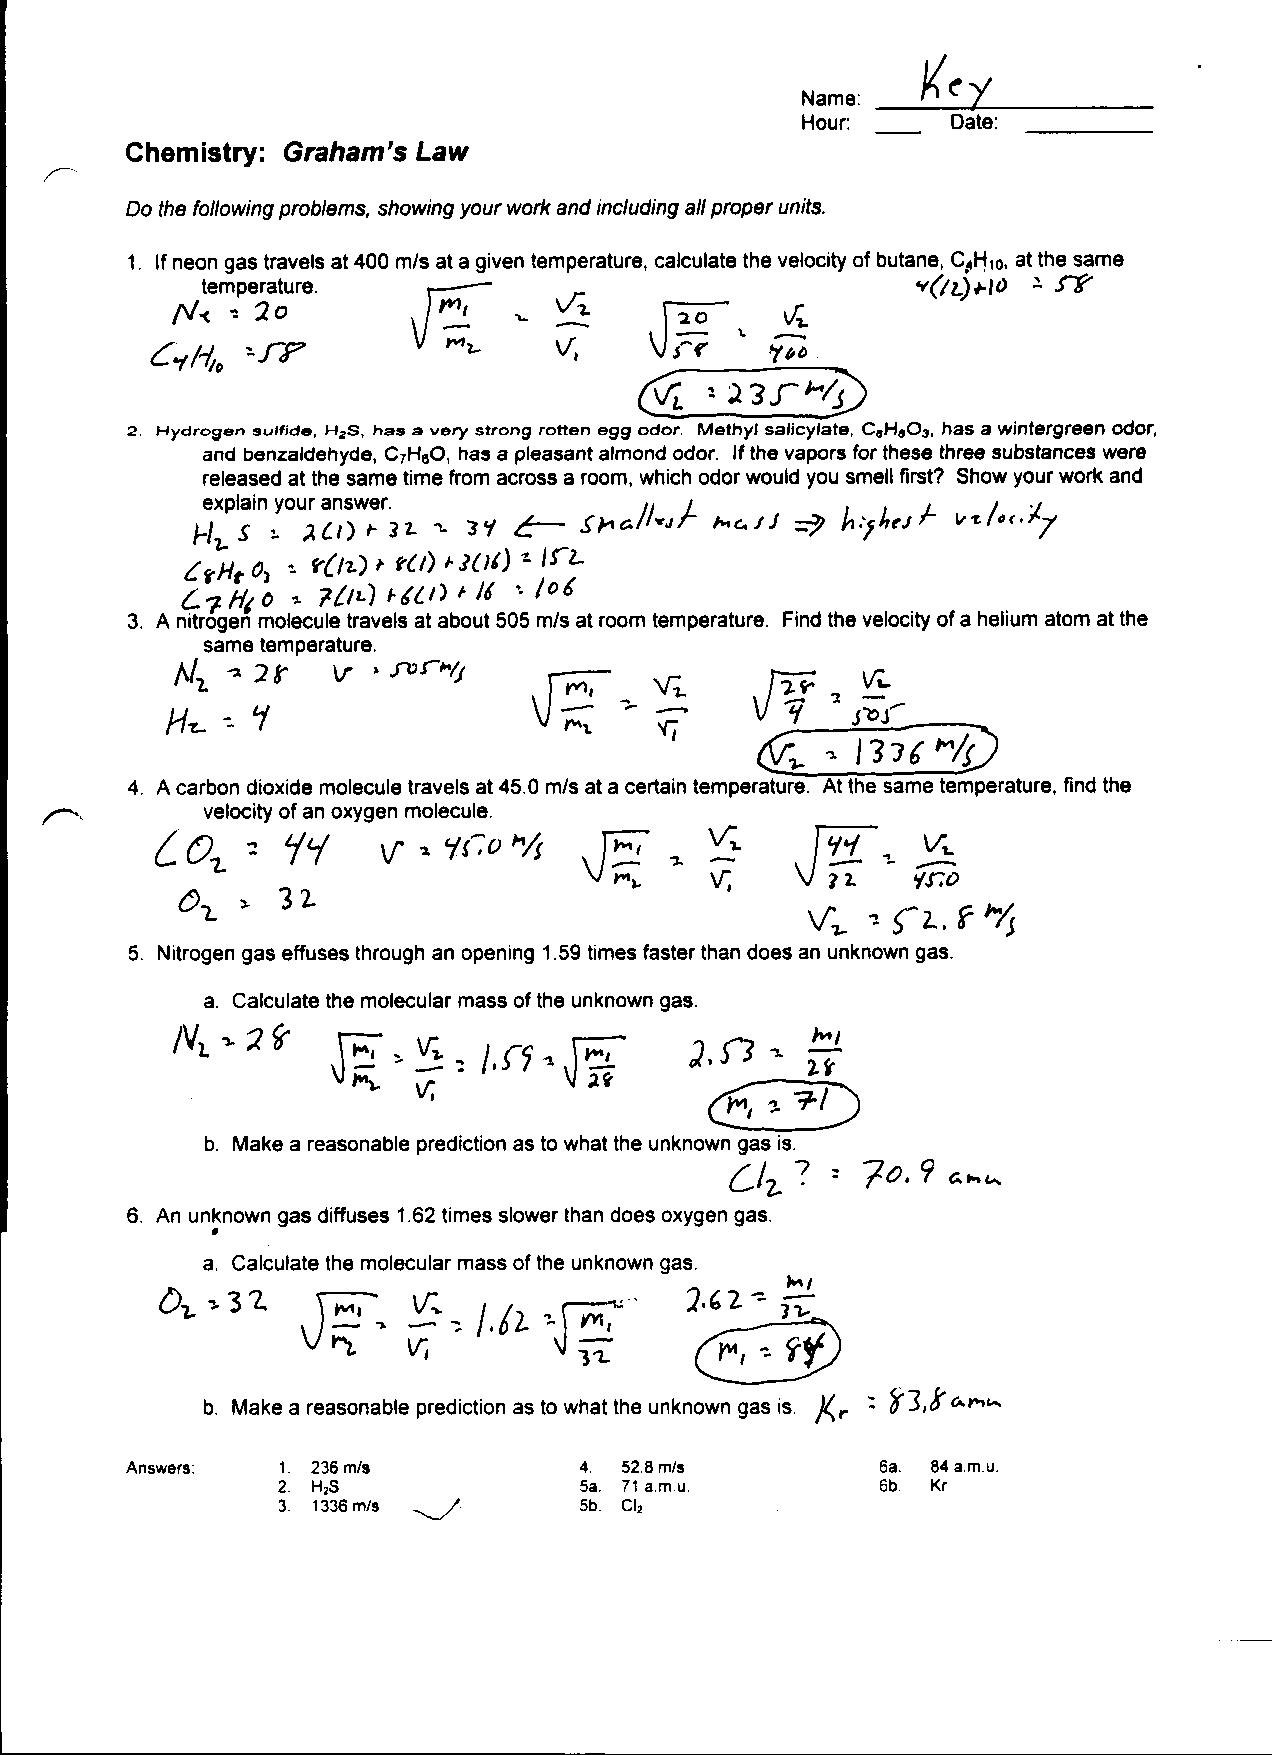 14 Best Images of Boyles Law Worksheet Answers  Ideal Gas Law Worksheet Answer Key, Boyles 